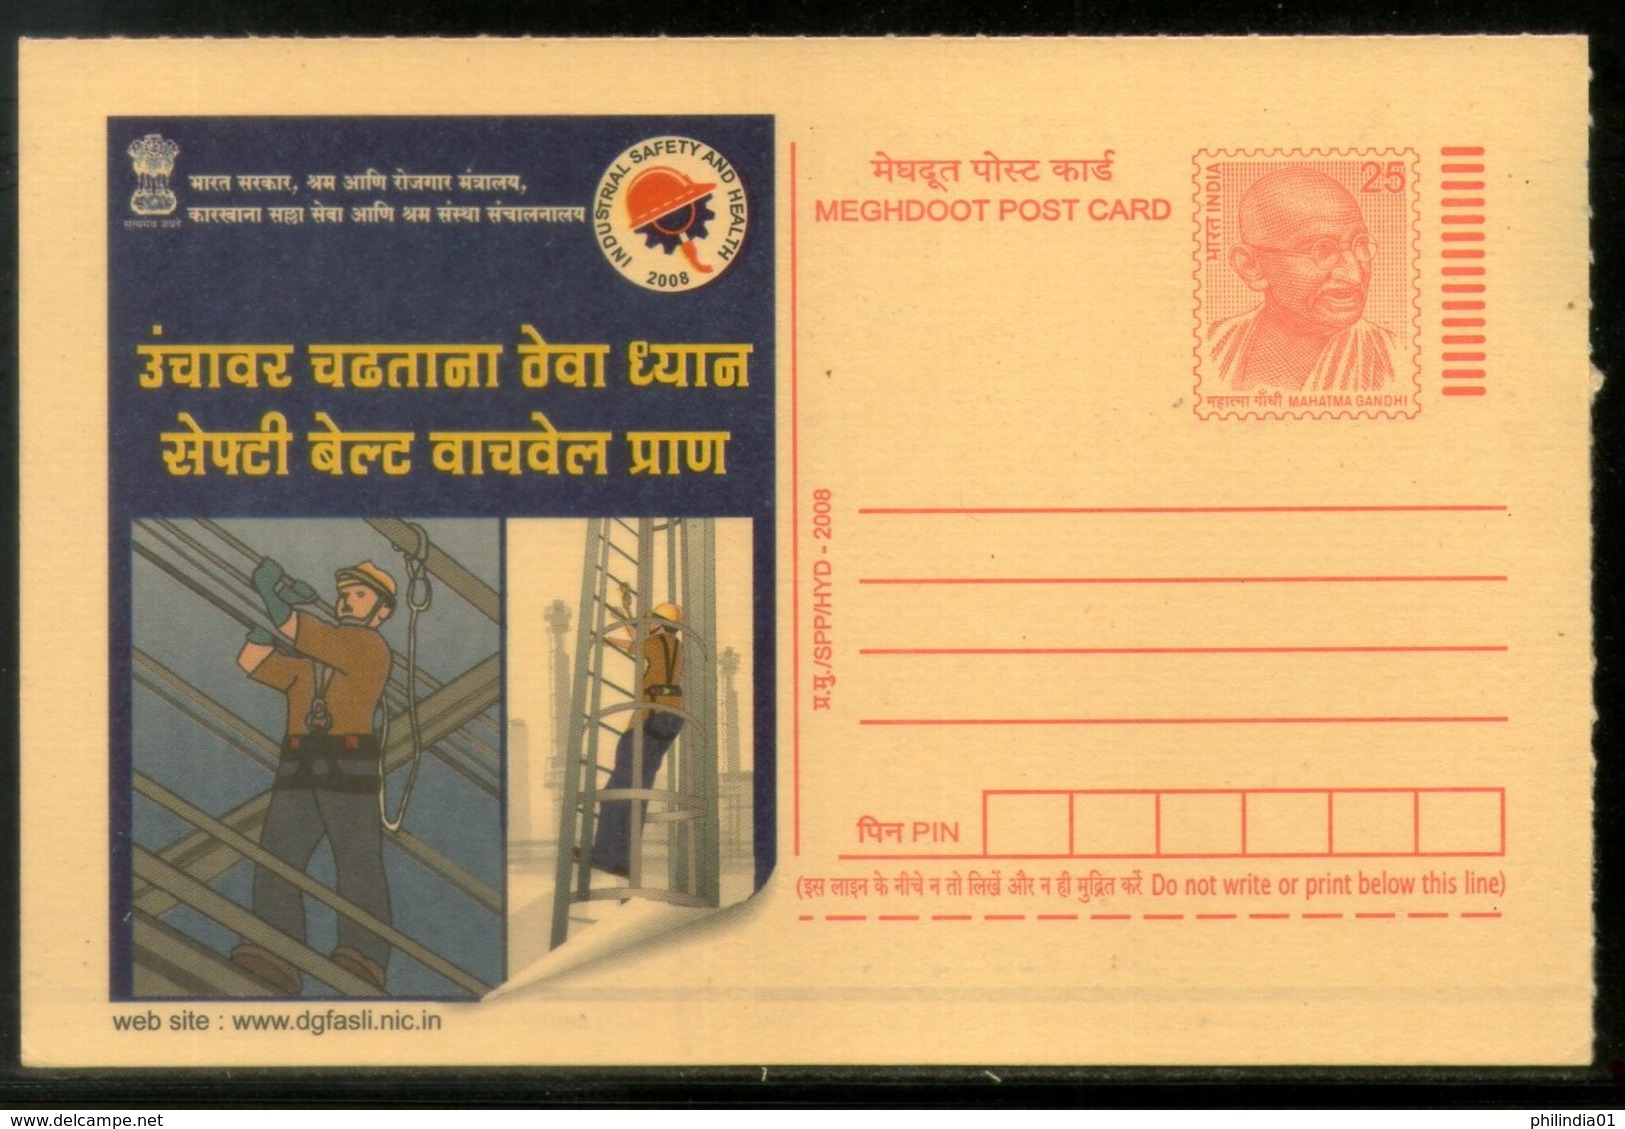 India 2008 Industrial Safety & Health Job Marathi Advert Gandhi Post Card # 505 - Accidents & Road Safety